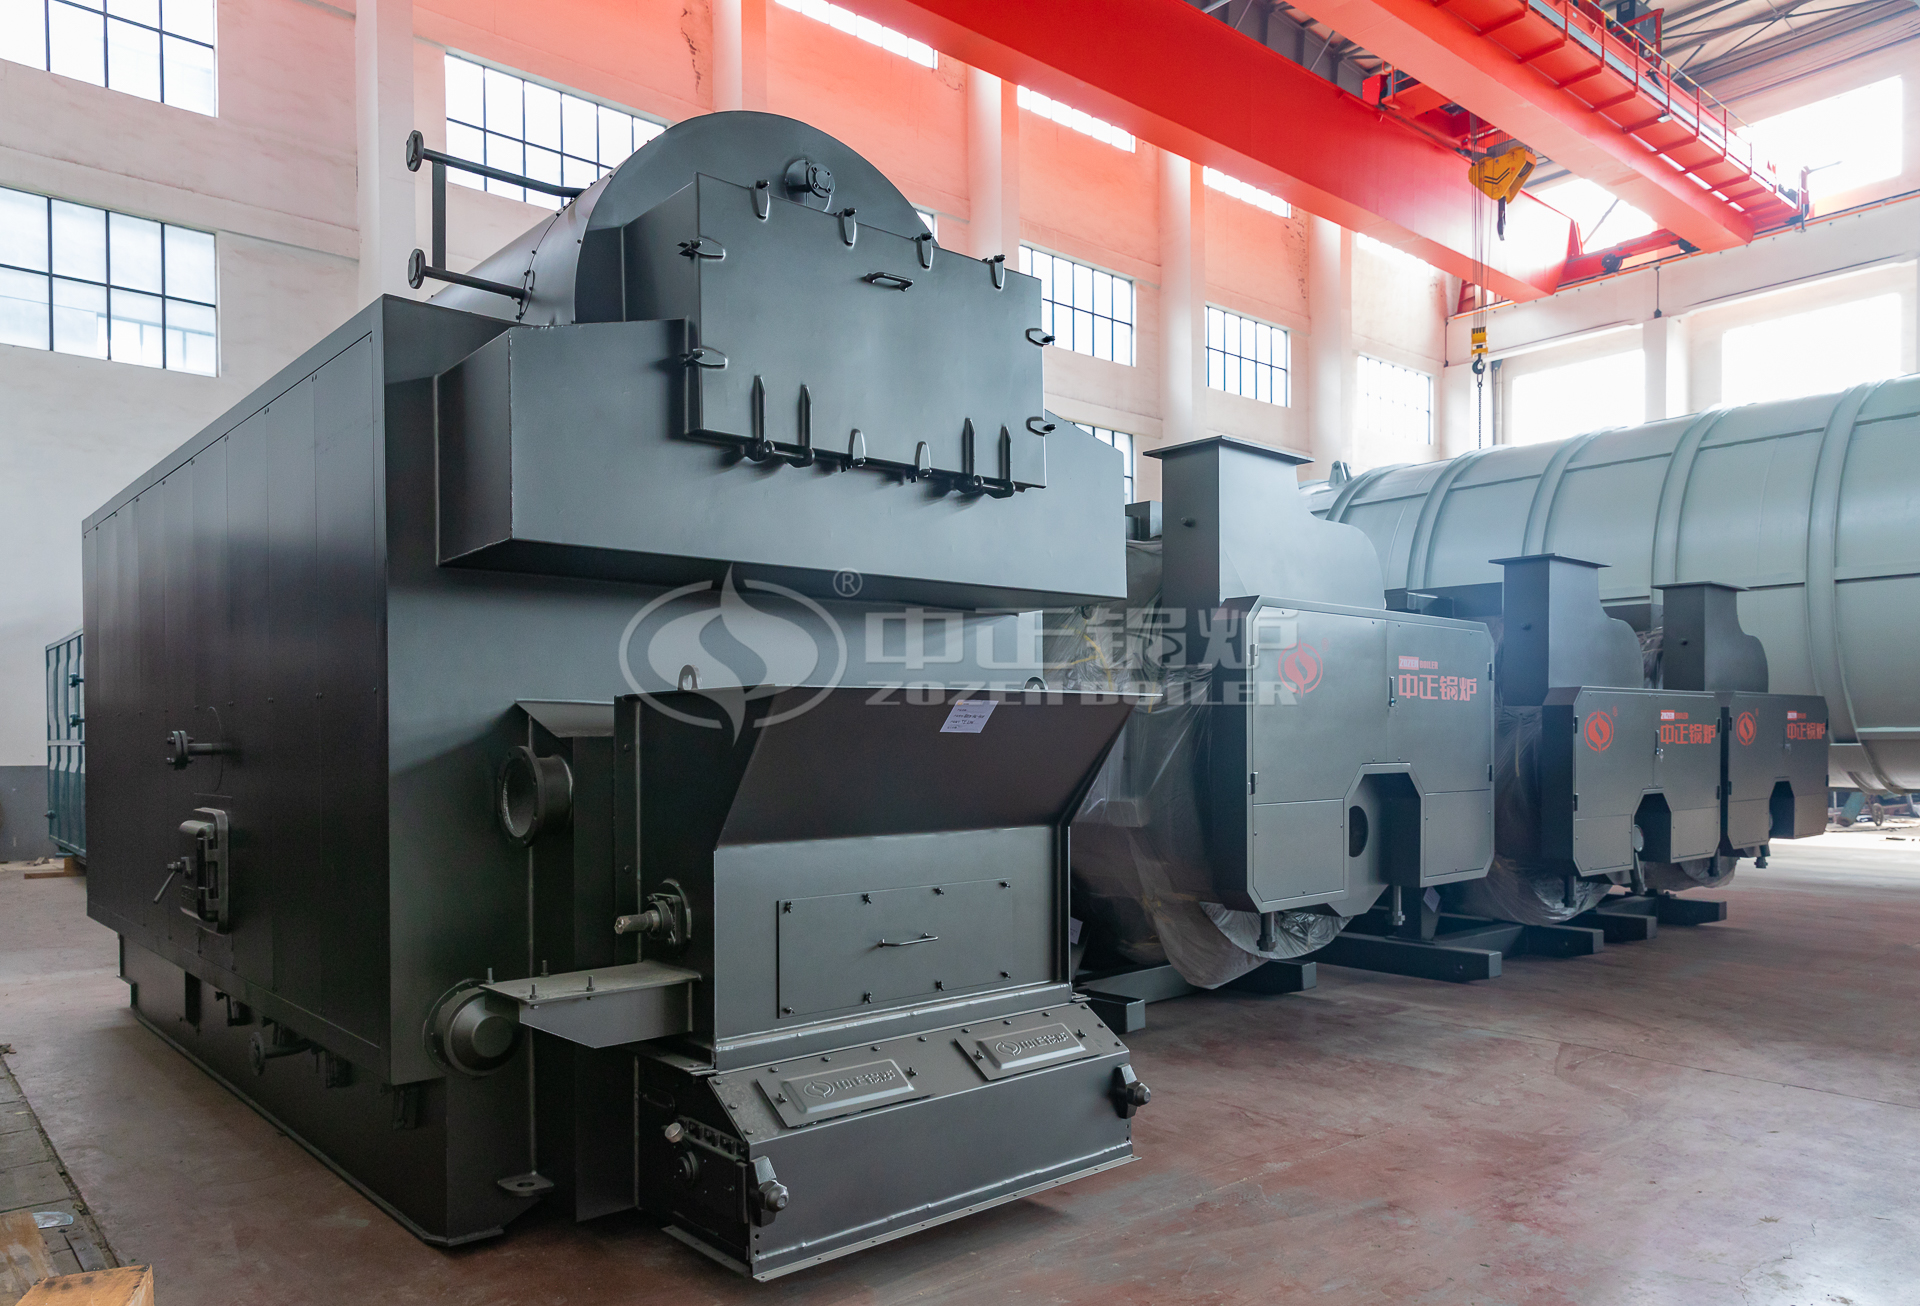 Coal Fired Boiler Cost: A Comprehensive Overview of ZOZEN’s Offerings